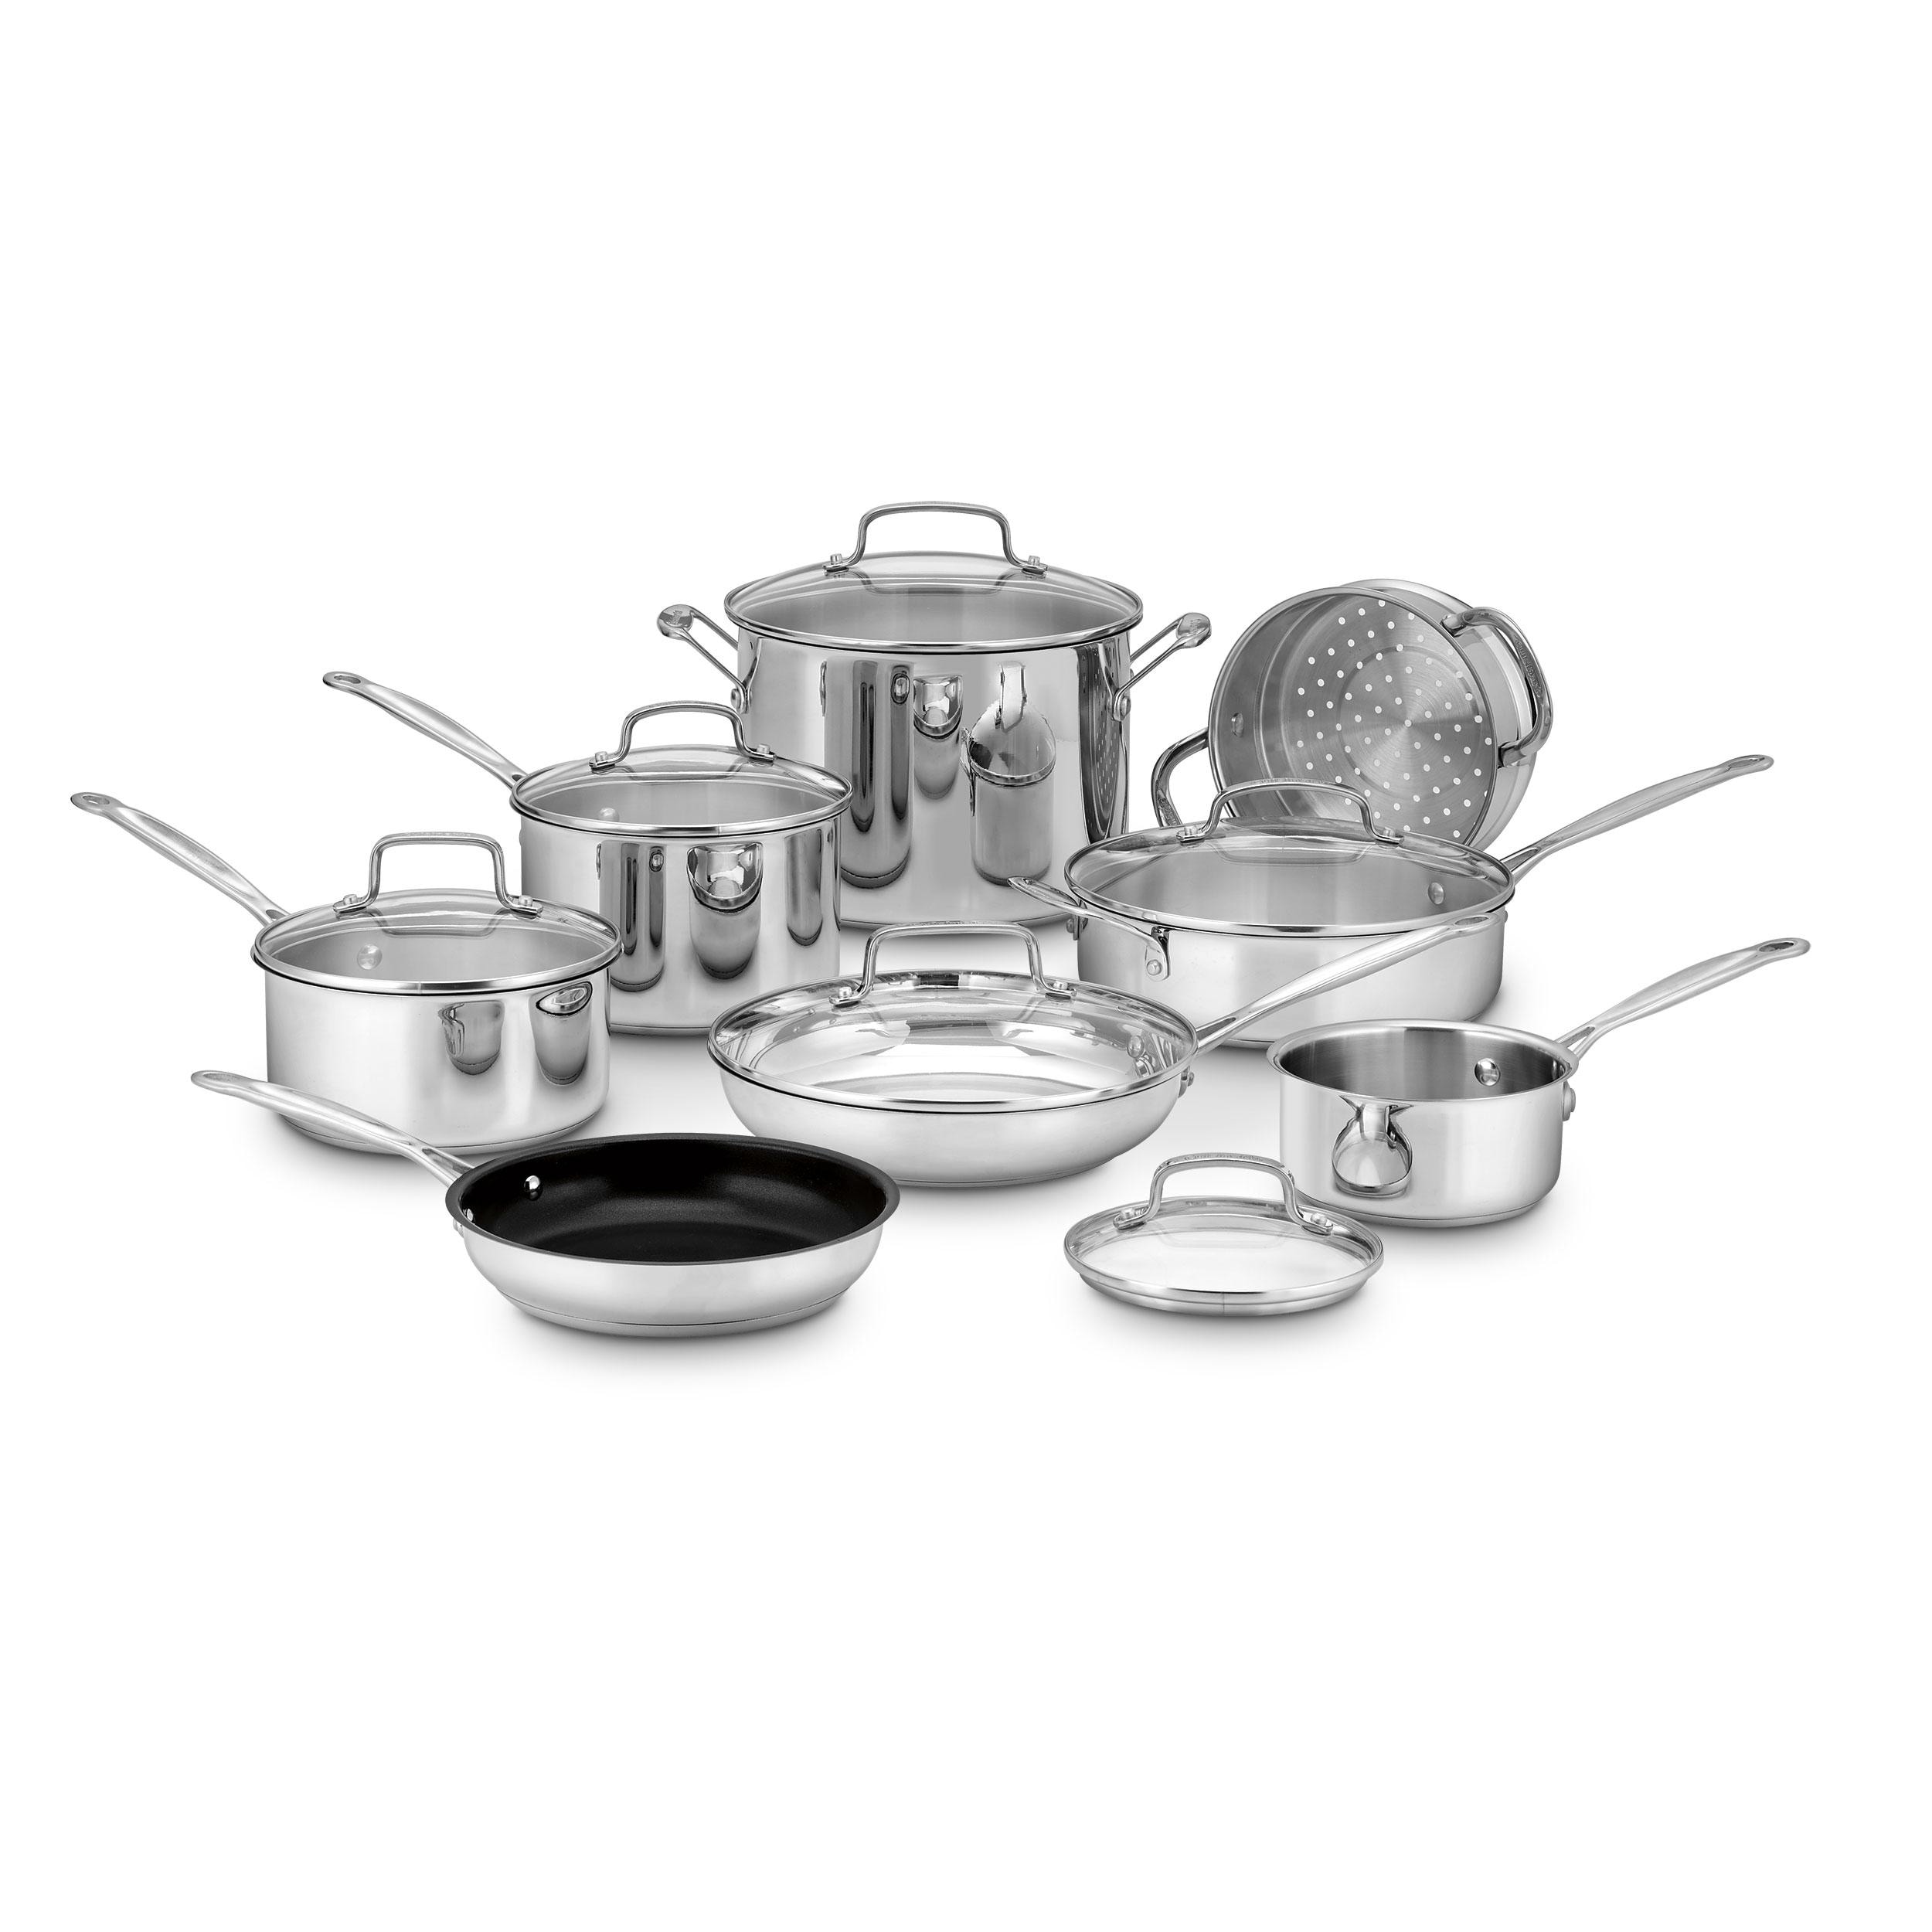 https://ak1.ostkcdn.com/images/products/is/images/direct/d53ce08e9c686b6842926b8e38b55483eaa33f2c/Cuisinart-Chef%27s-Classic%E2%84%A2-Stainless-14-Piece-Set.jpg